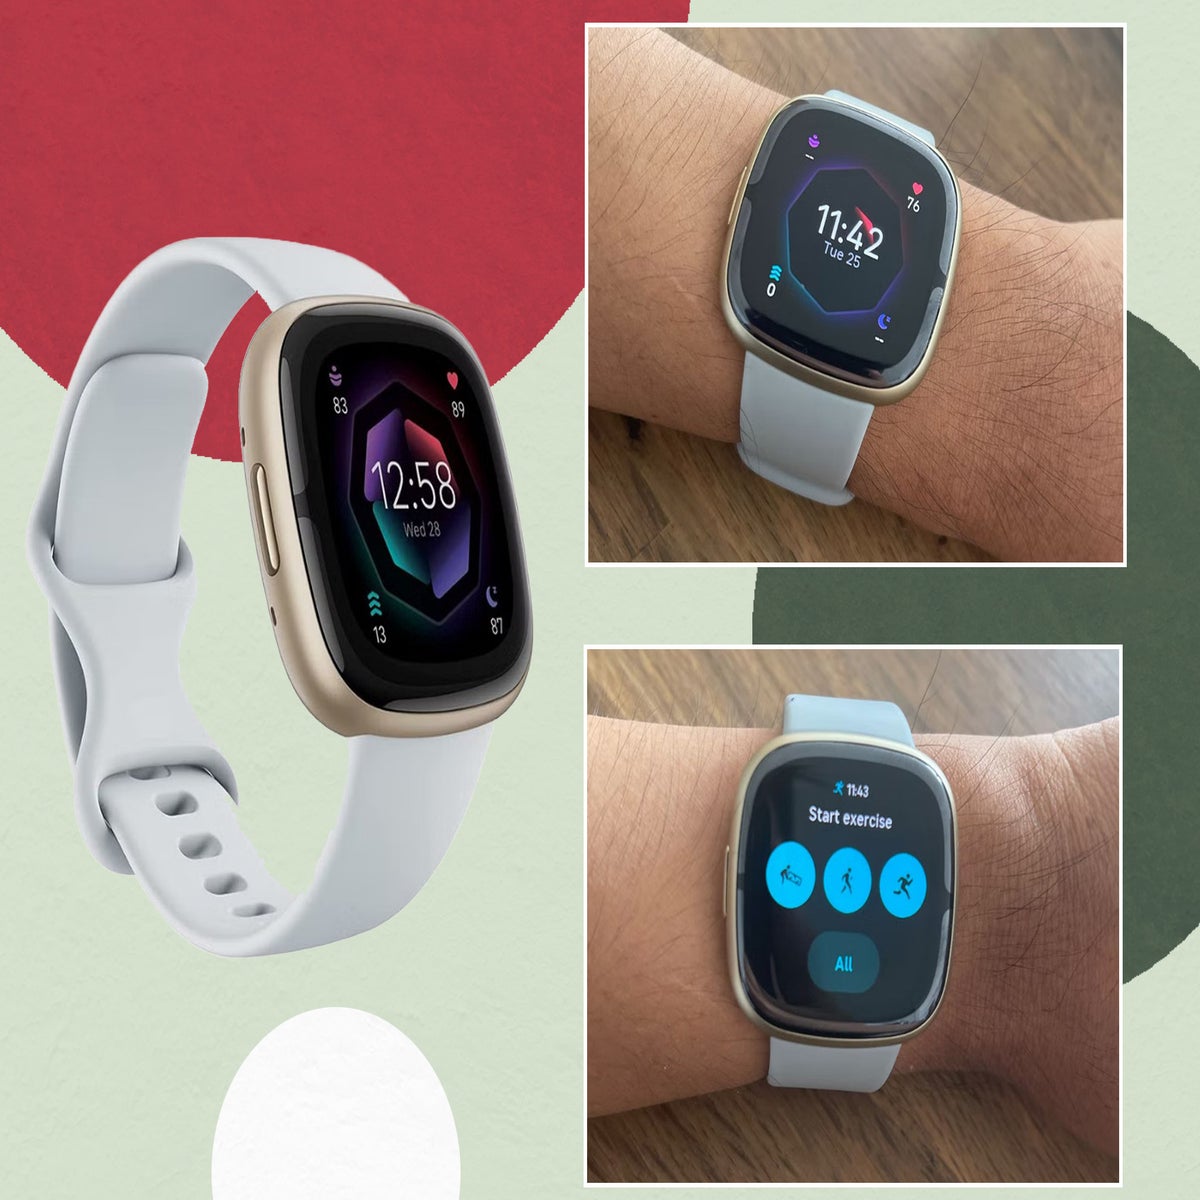 Fitbit Sense 2 review: I'm really stressed, apparently